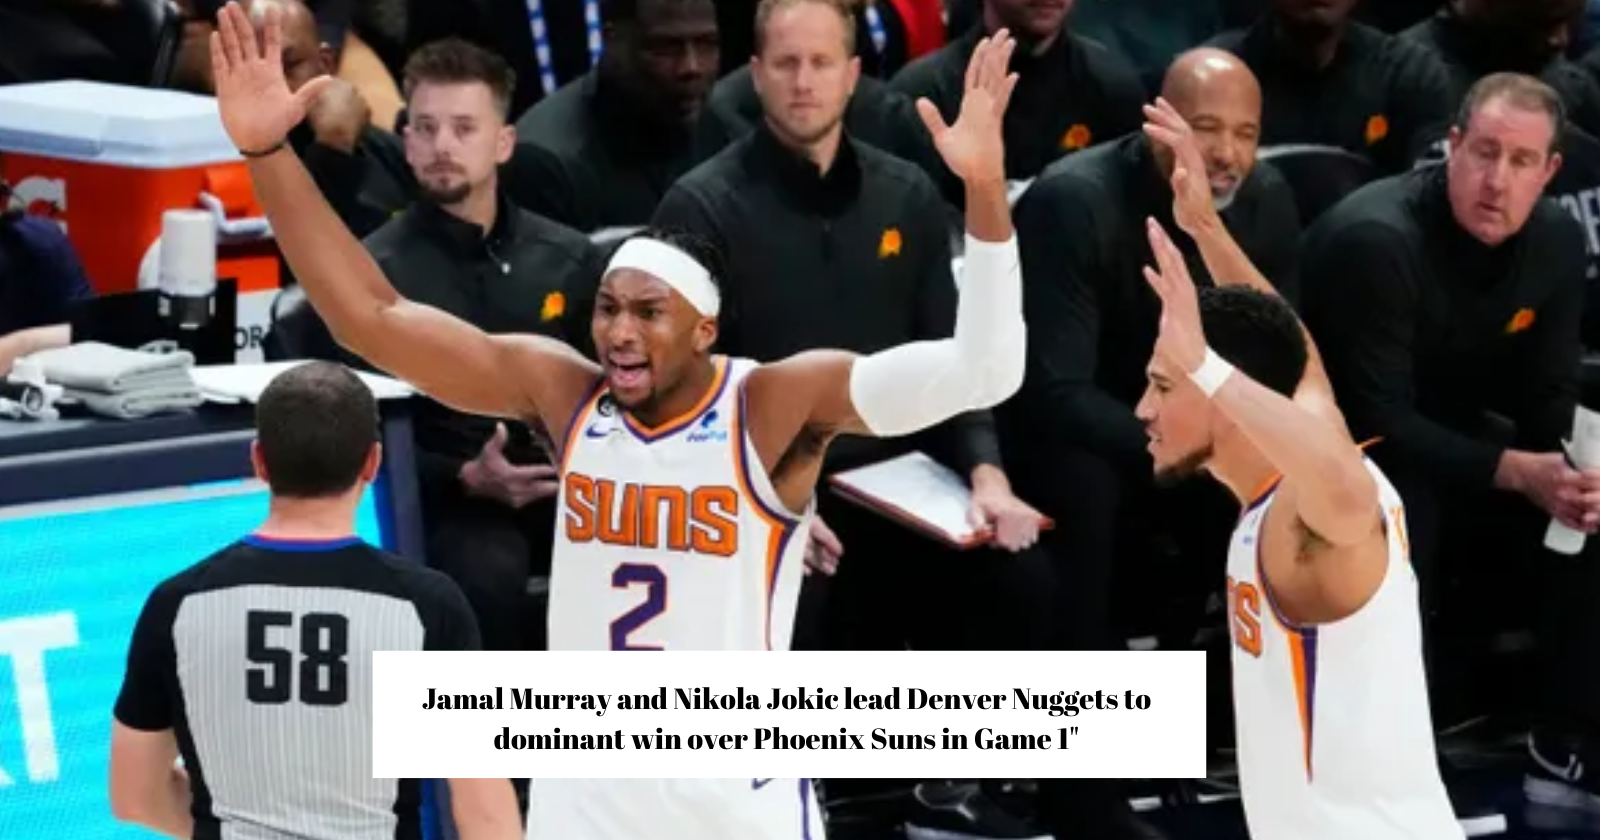 Jamal Murray and Nikola Jokic lead Denver Nuggets to dominant win over Phoenix Suns in Game 1